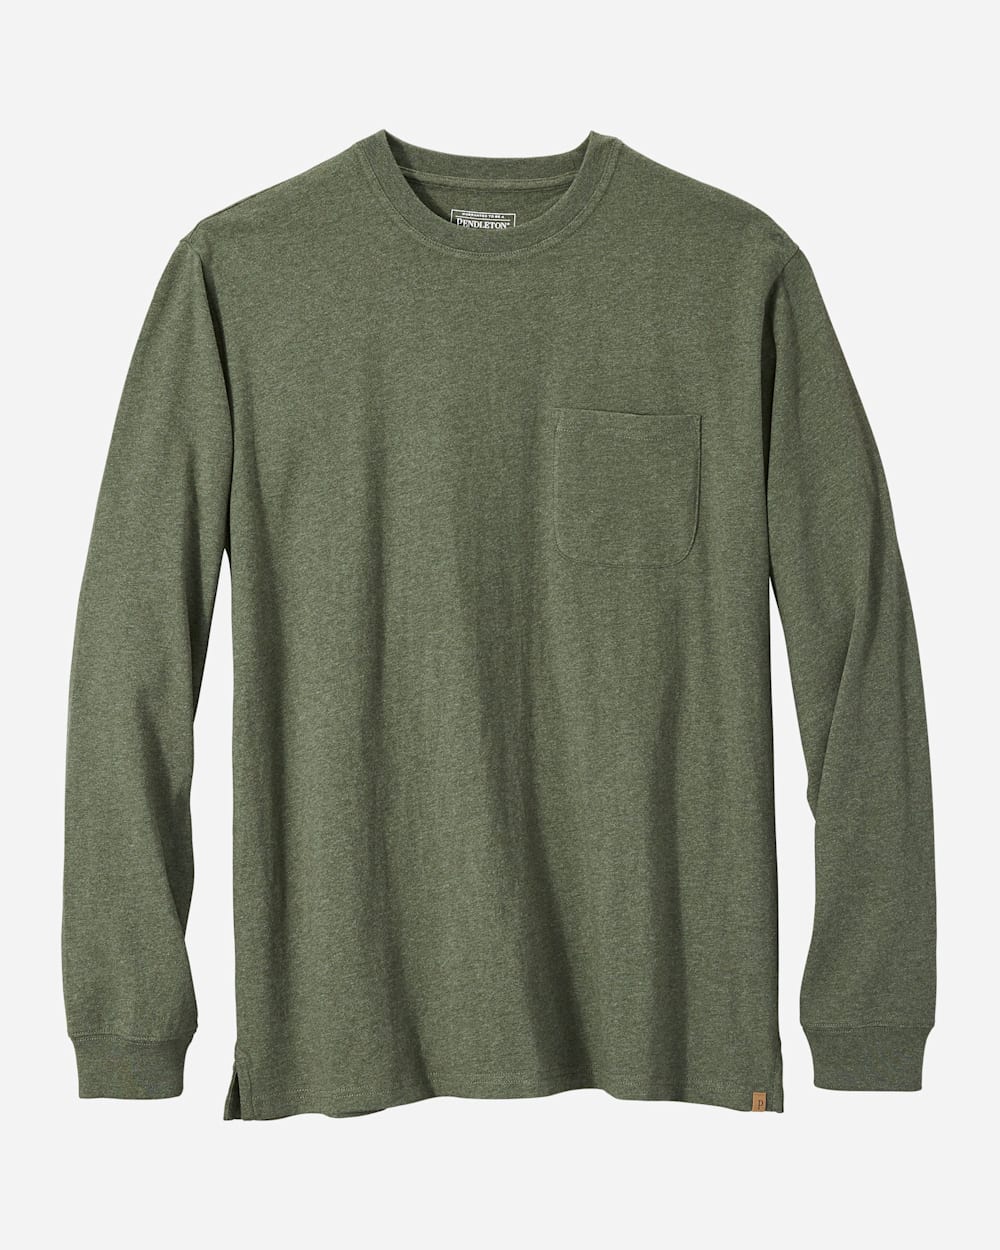 MEN'S LONG-SLEEVE DESCHUTES POCKET TEE IN ARMY GREEN HEATHER image number 1